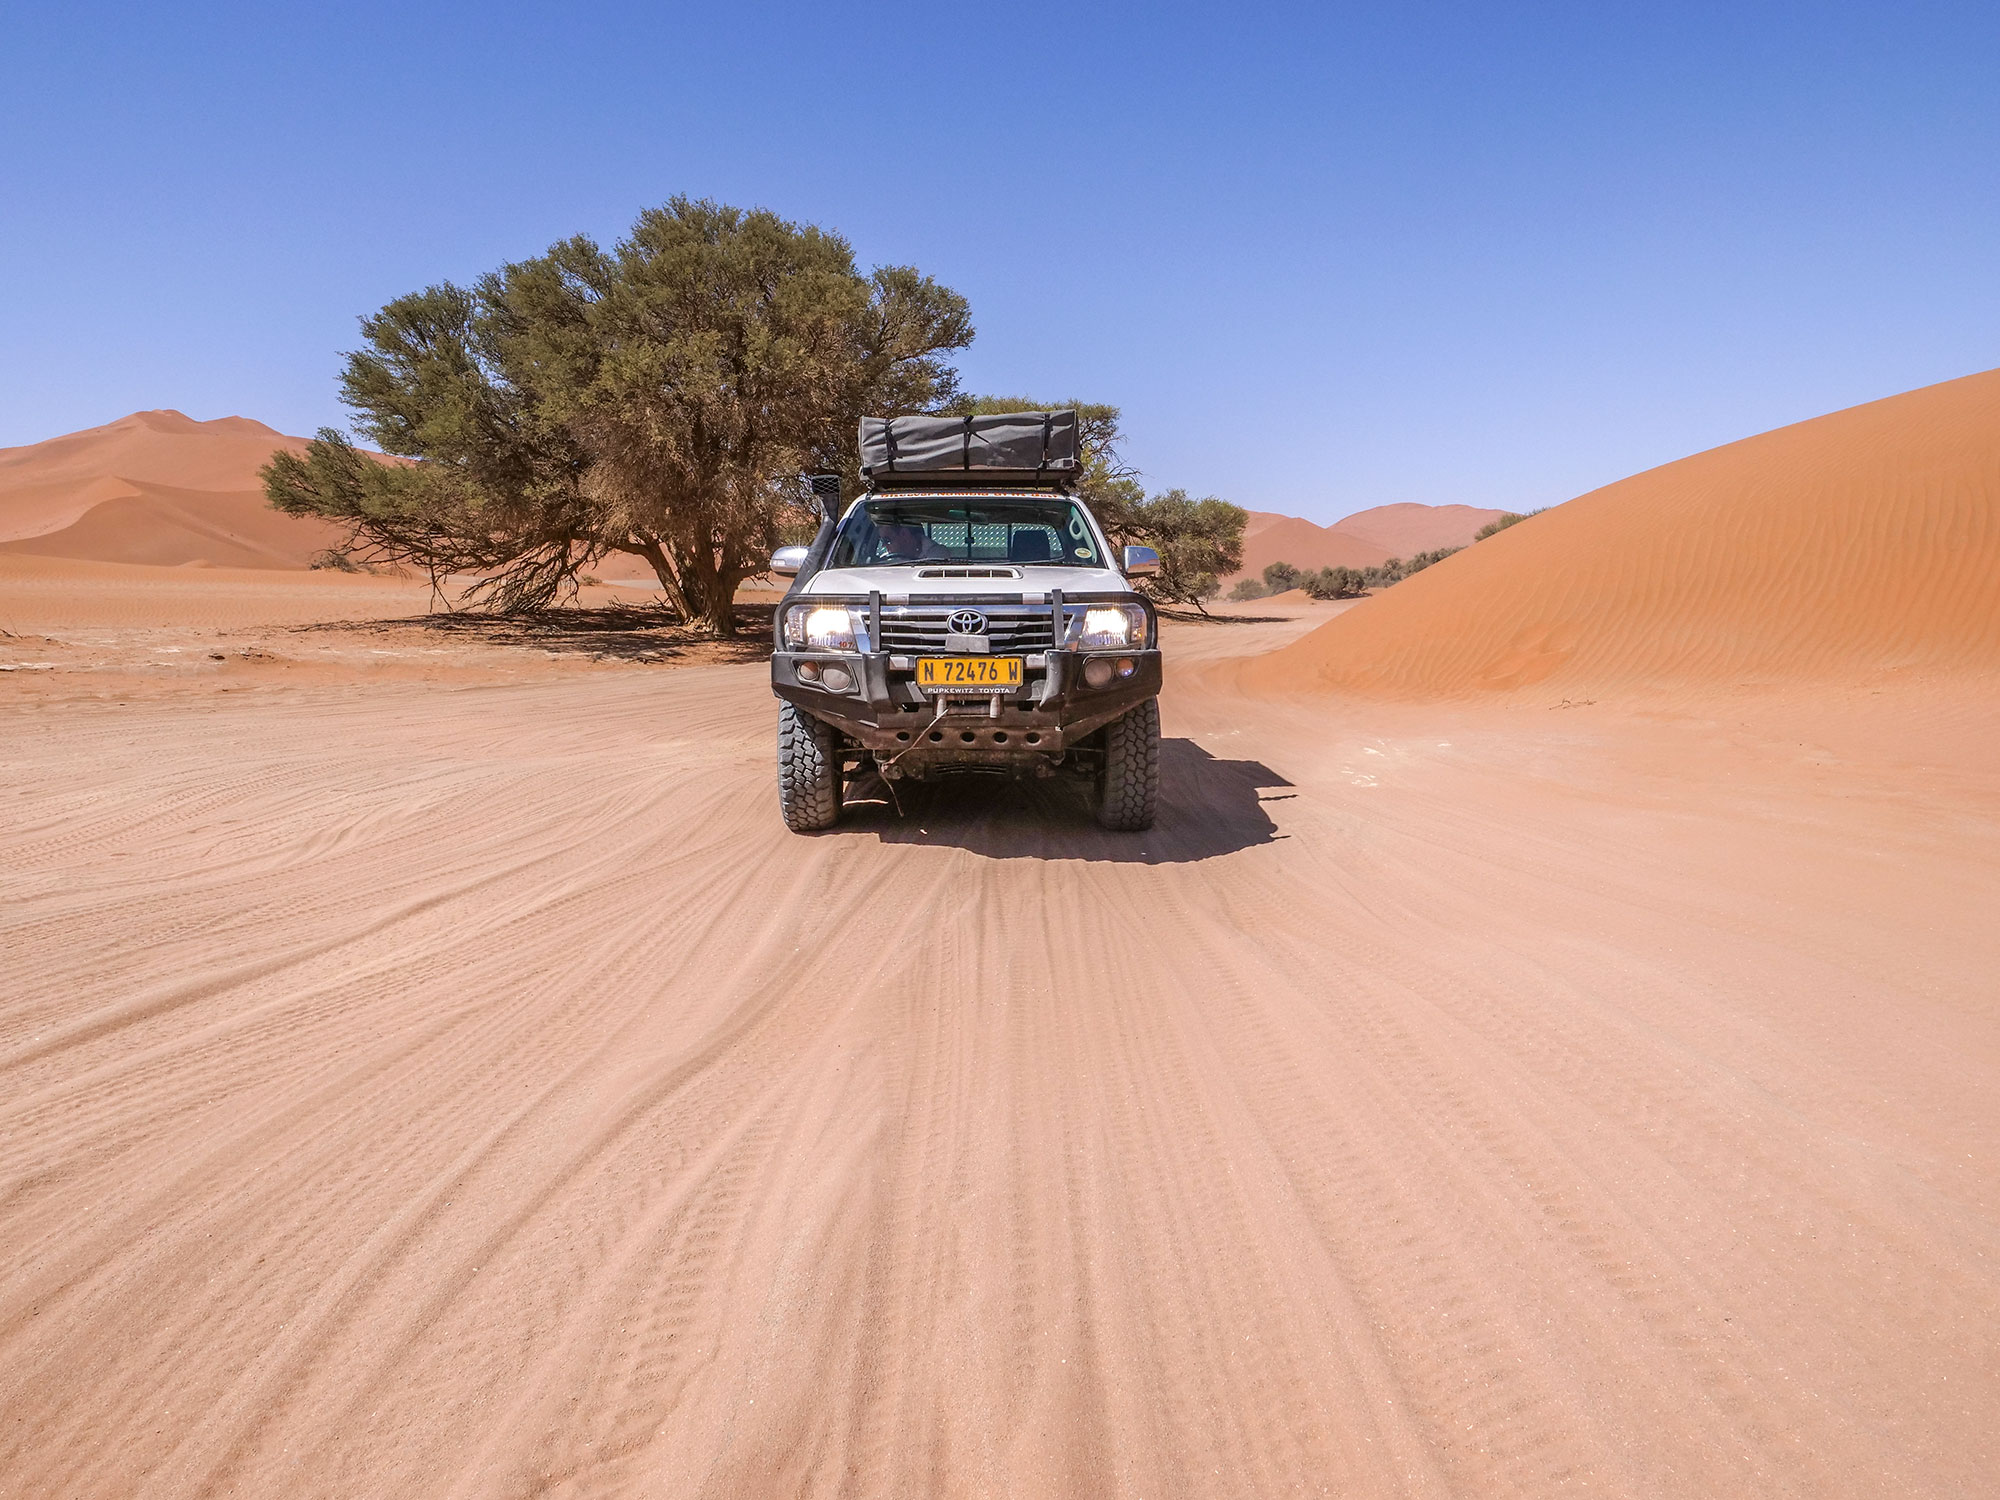 Toyota Hilux self-drive 4x4 in Sossusvlei with sand dunes, Namib Desert in Namibia, Africa